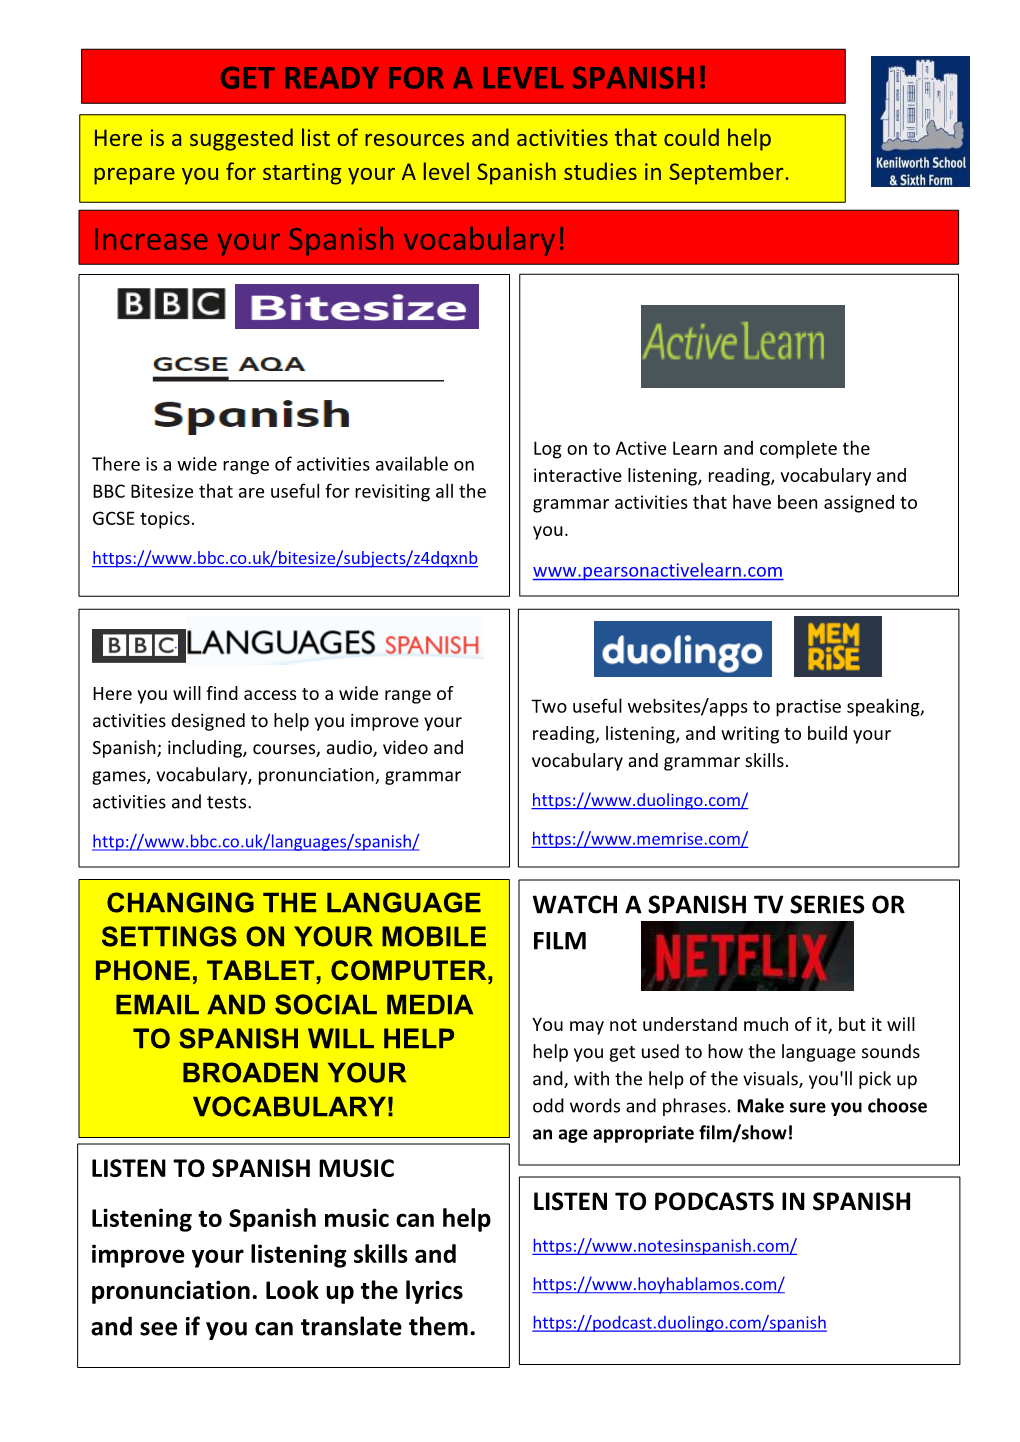 Get Ready for a Level Spanish!